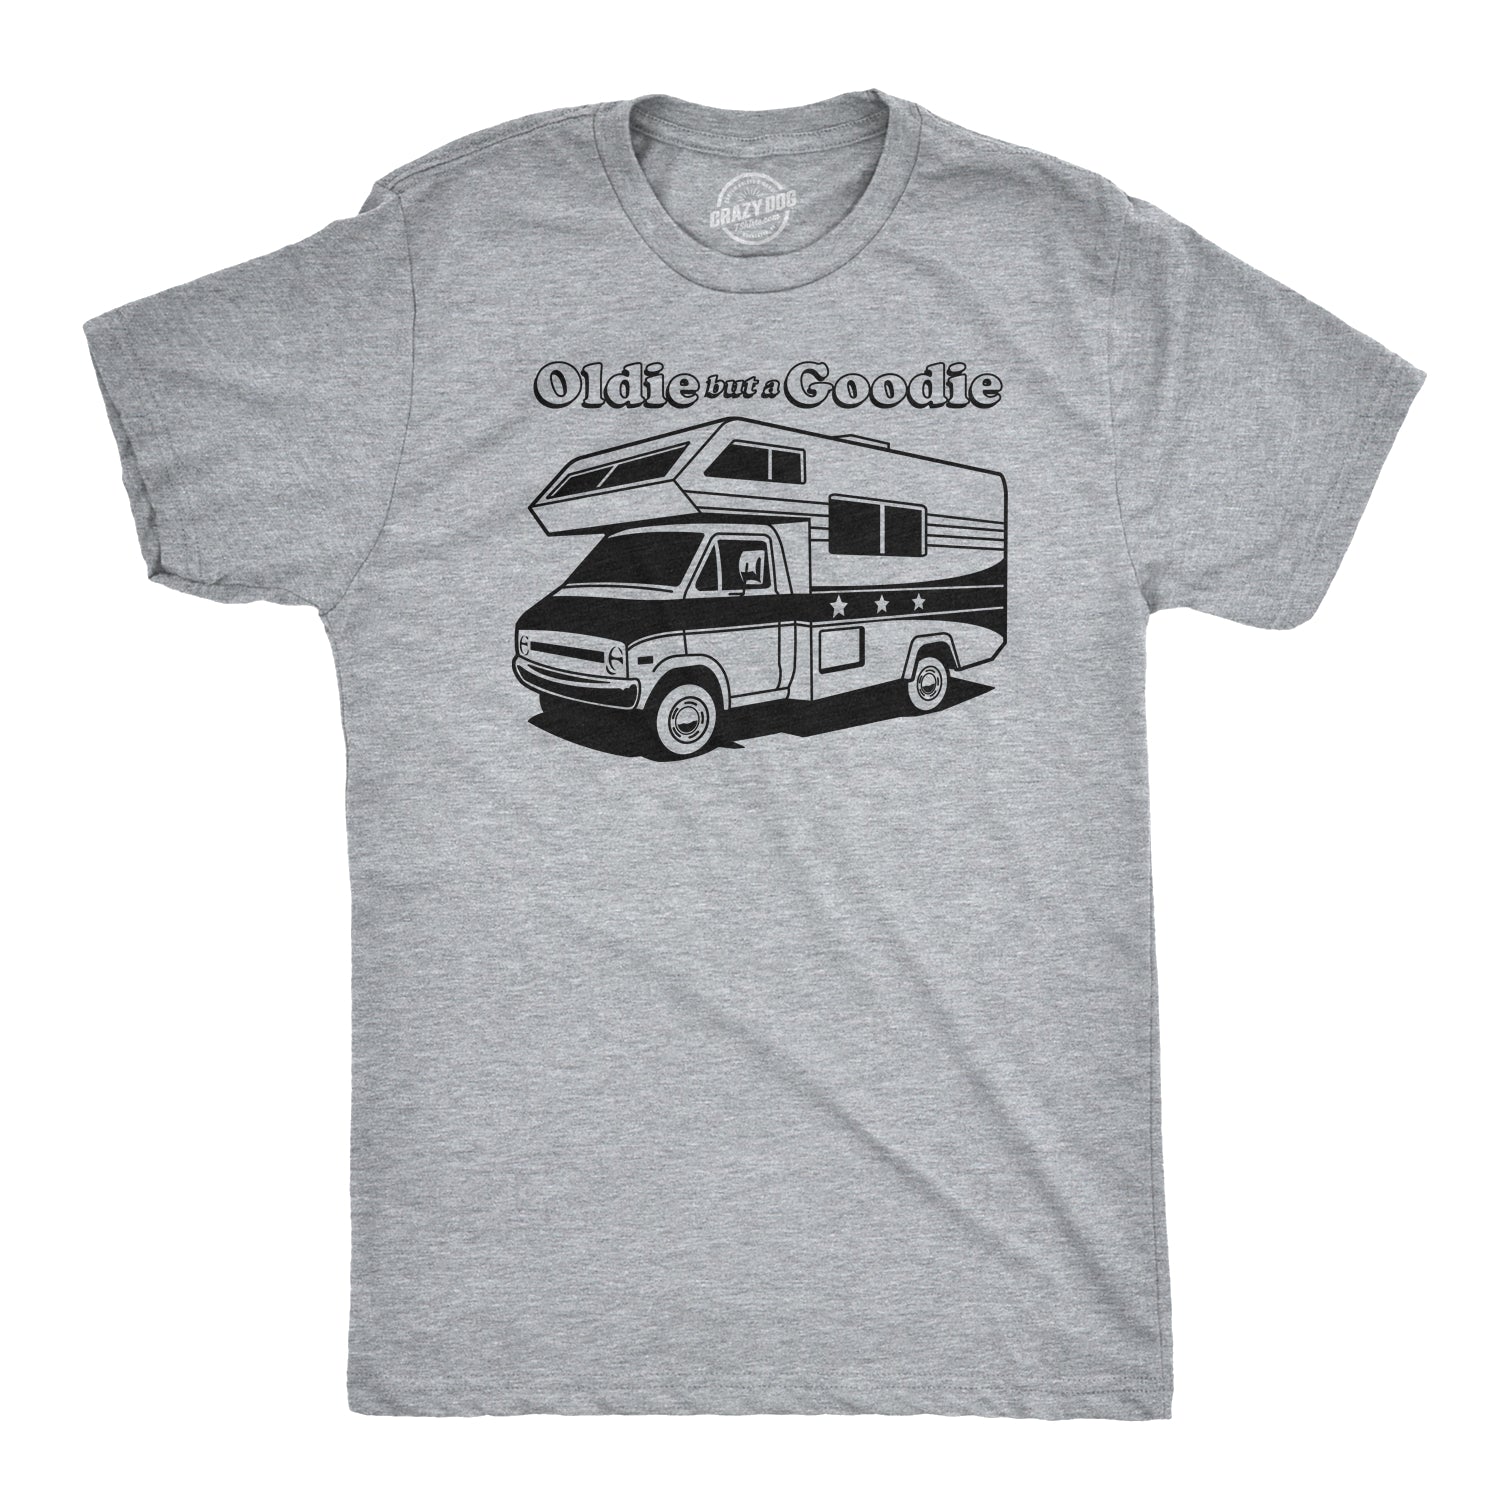 Funny Light Heather Grey Oldie But a Goodie Mens T Shirt Nerdy Camping Retro Tee